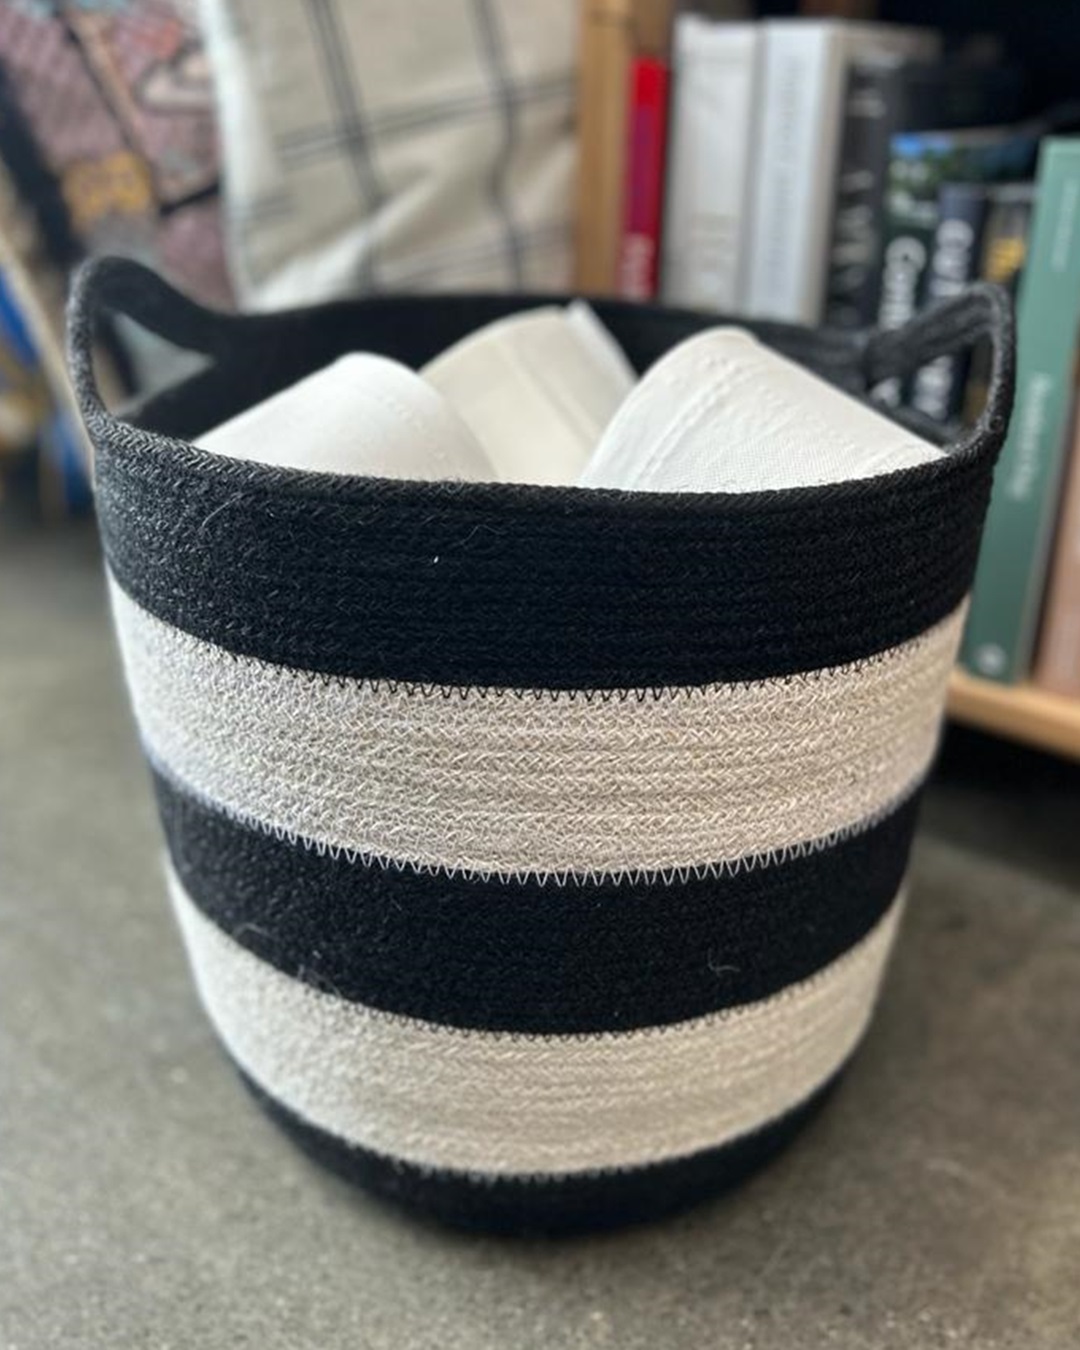 Black and white stripe jute basket with towels inside